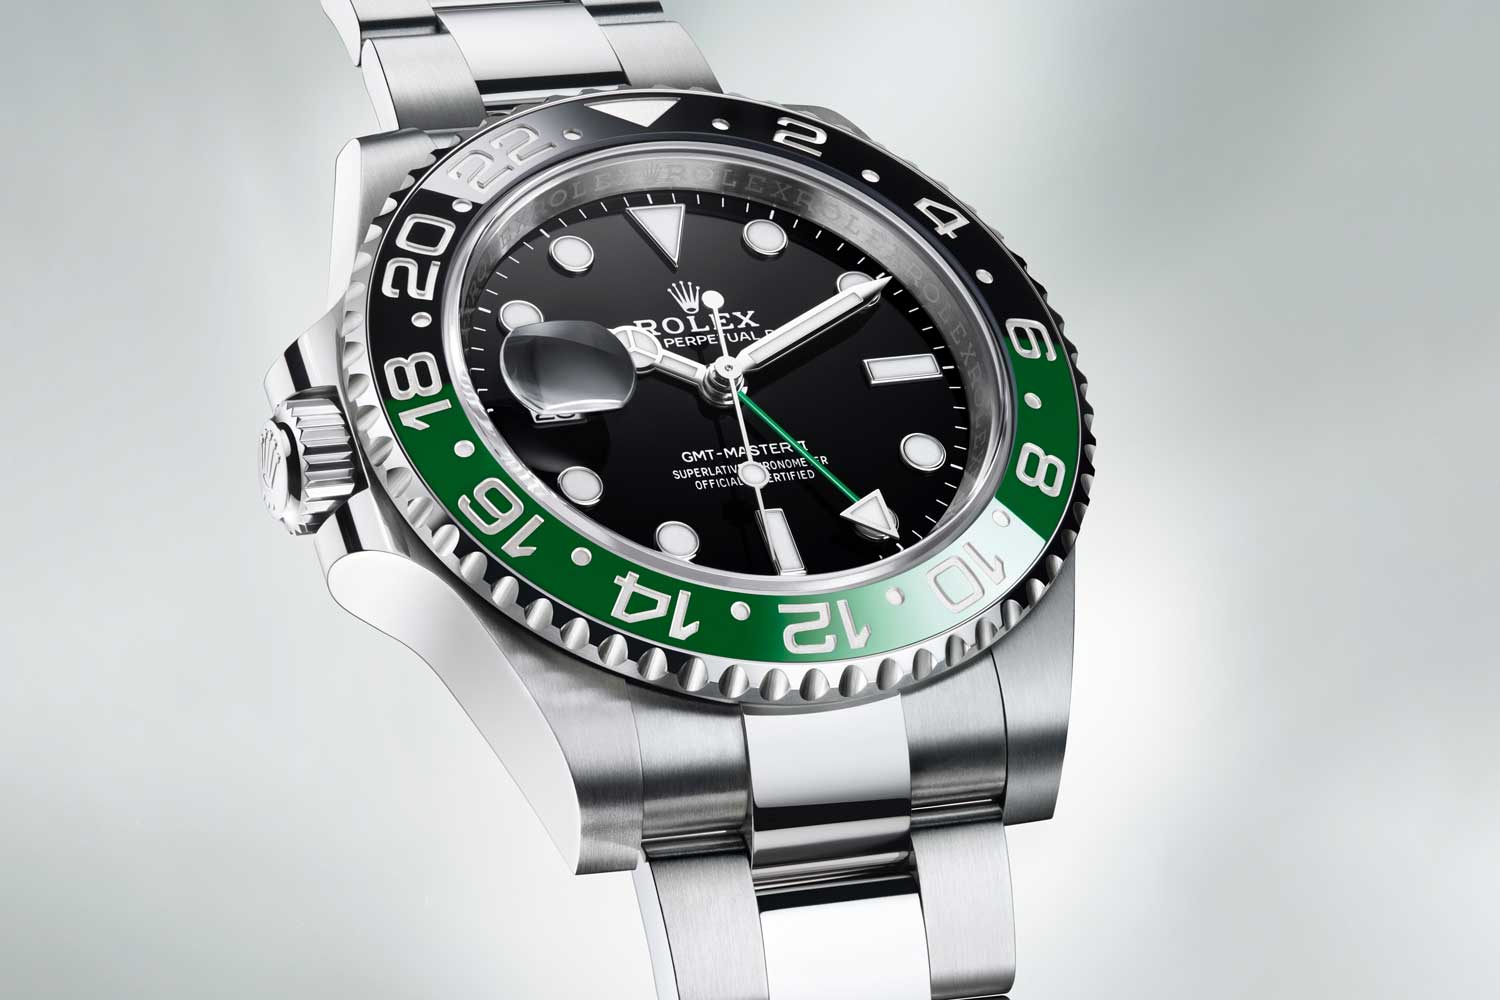 The 2022 40mm Rolex Oyster Perpetual GMT-Master II is the first GMT-Master II to be produced in a left-handed orientation